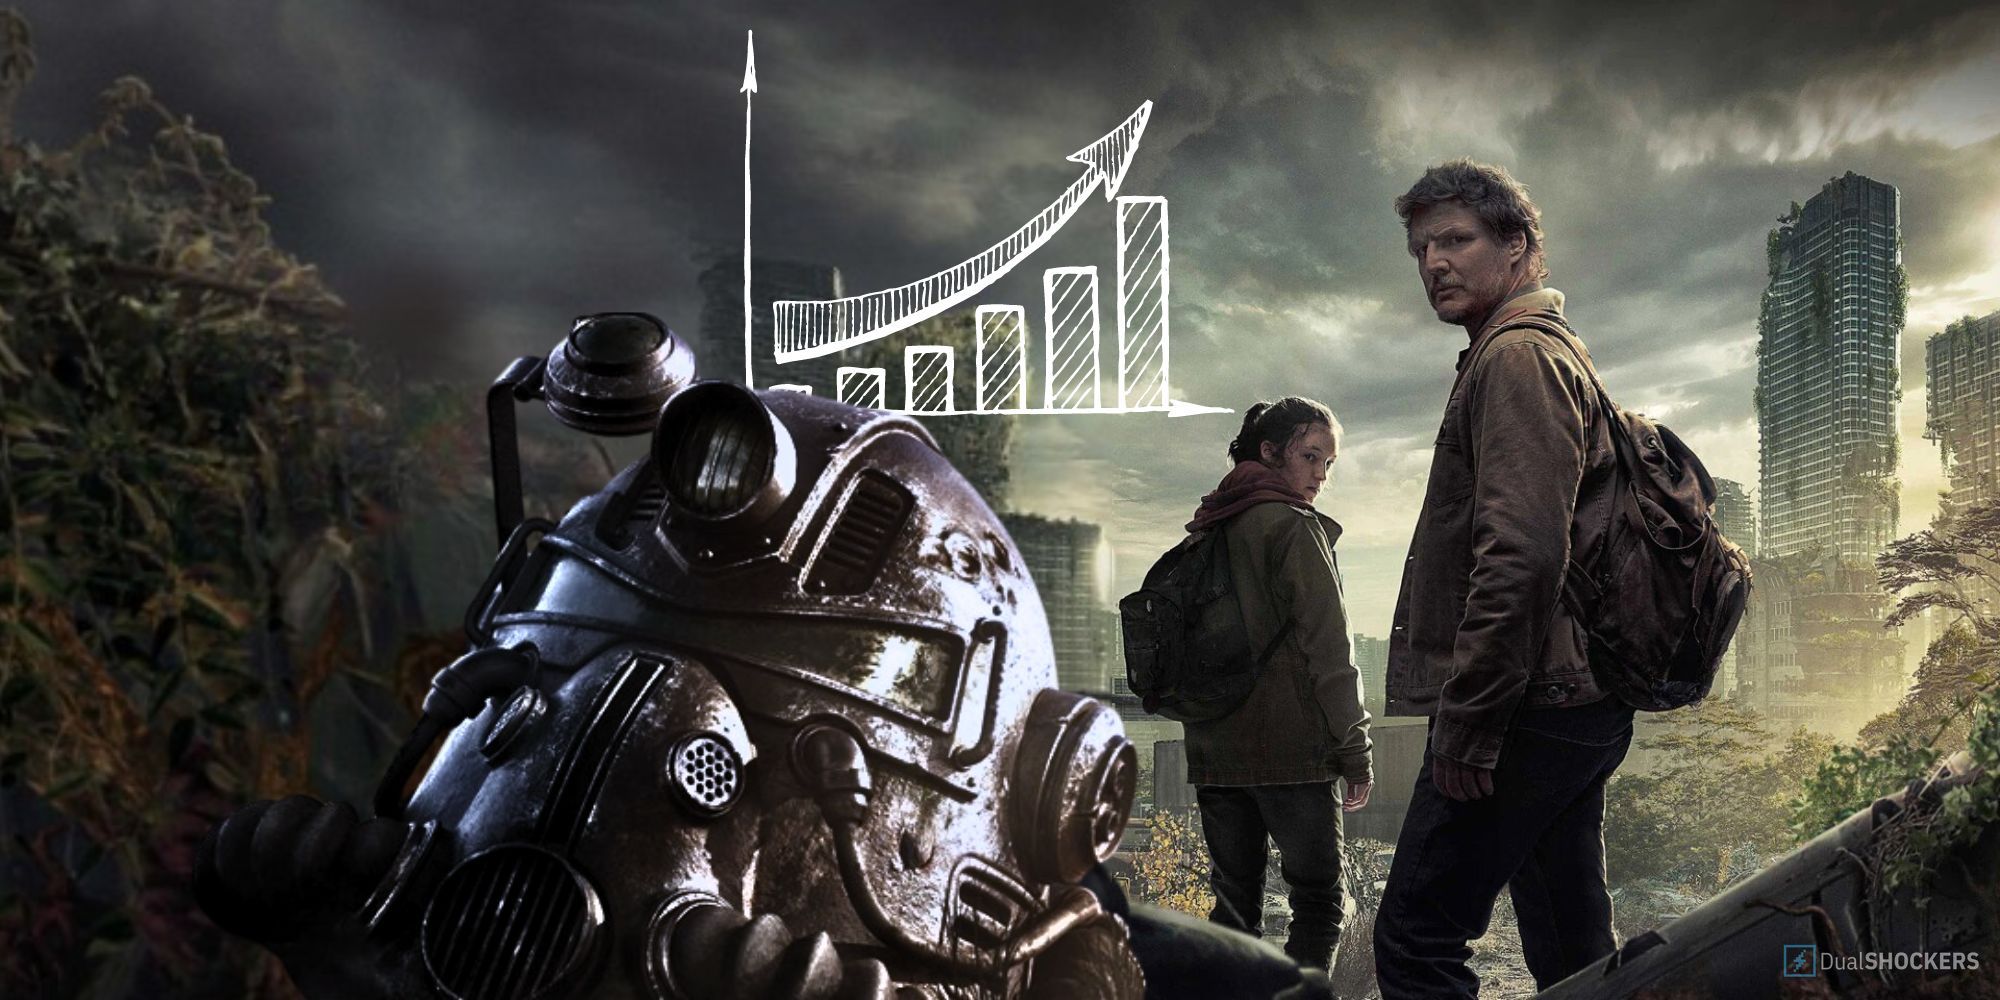 Feature image with a power armor helmet from Fallout in front of Joel and Ellie from The Last of Us show with a graph in the background.